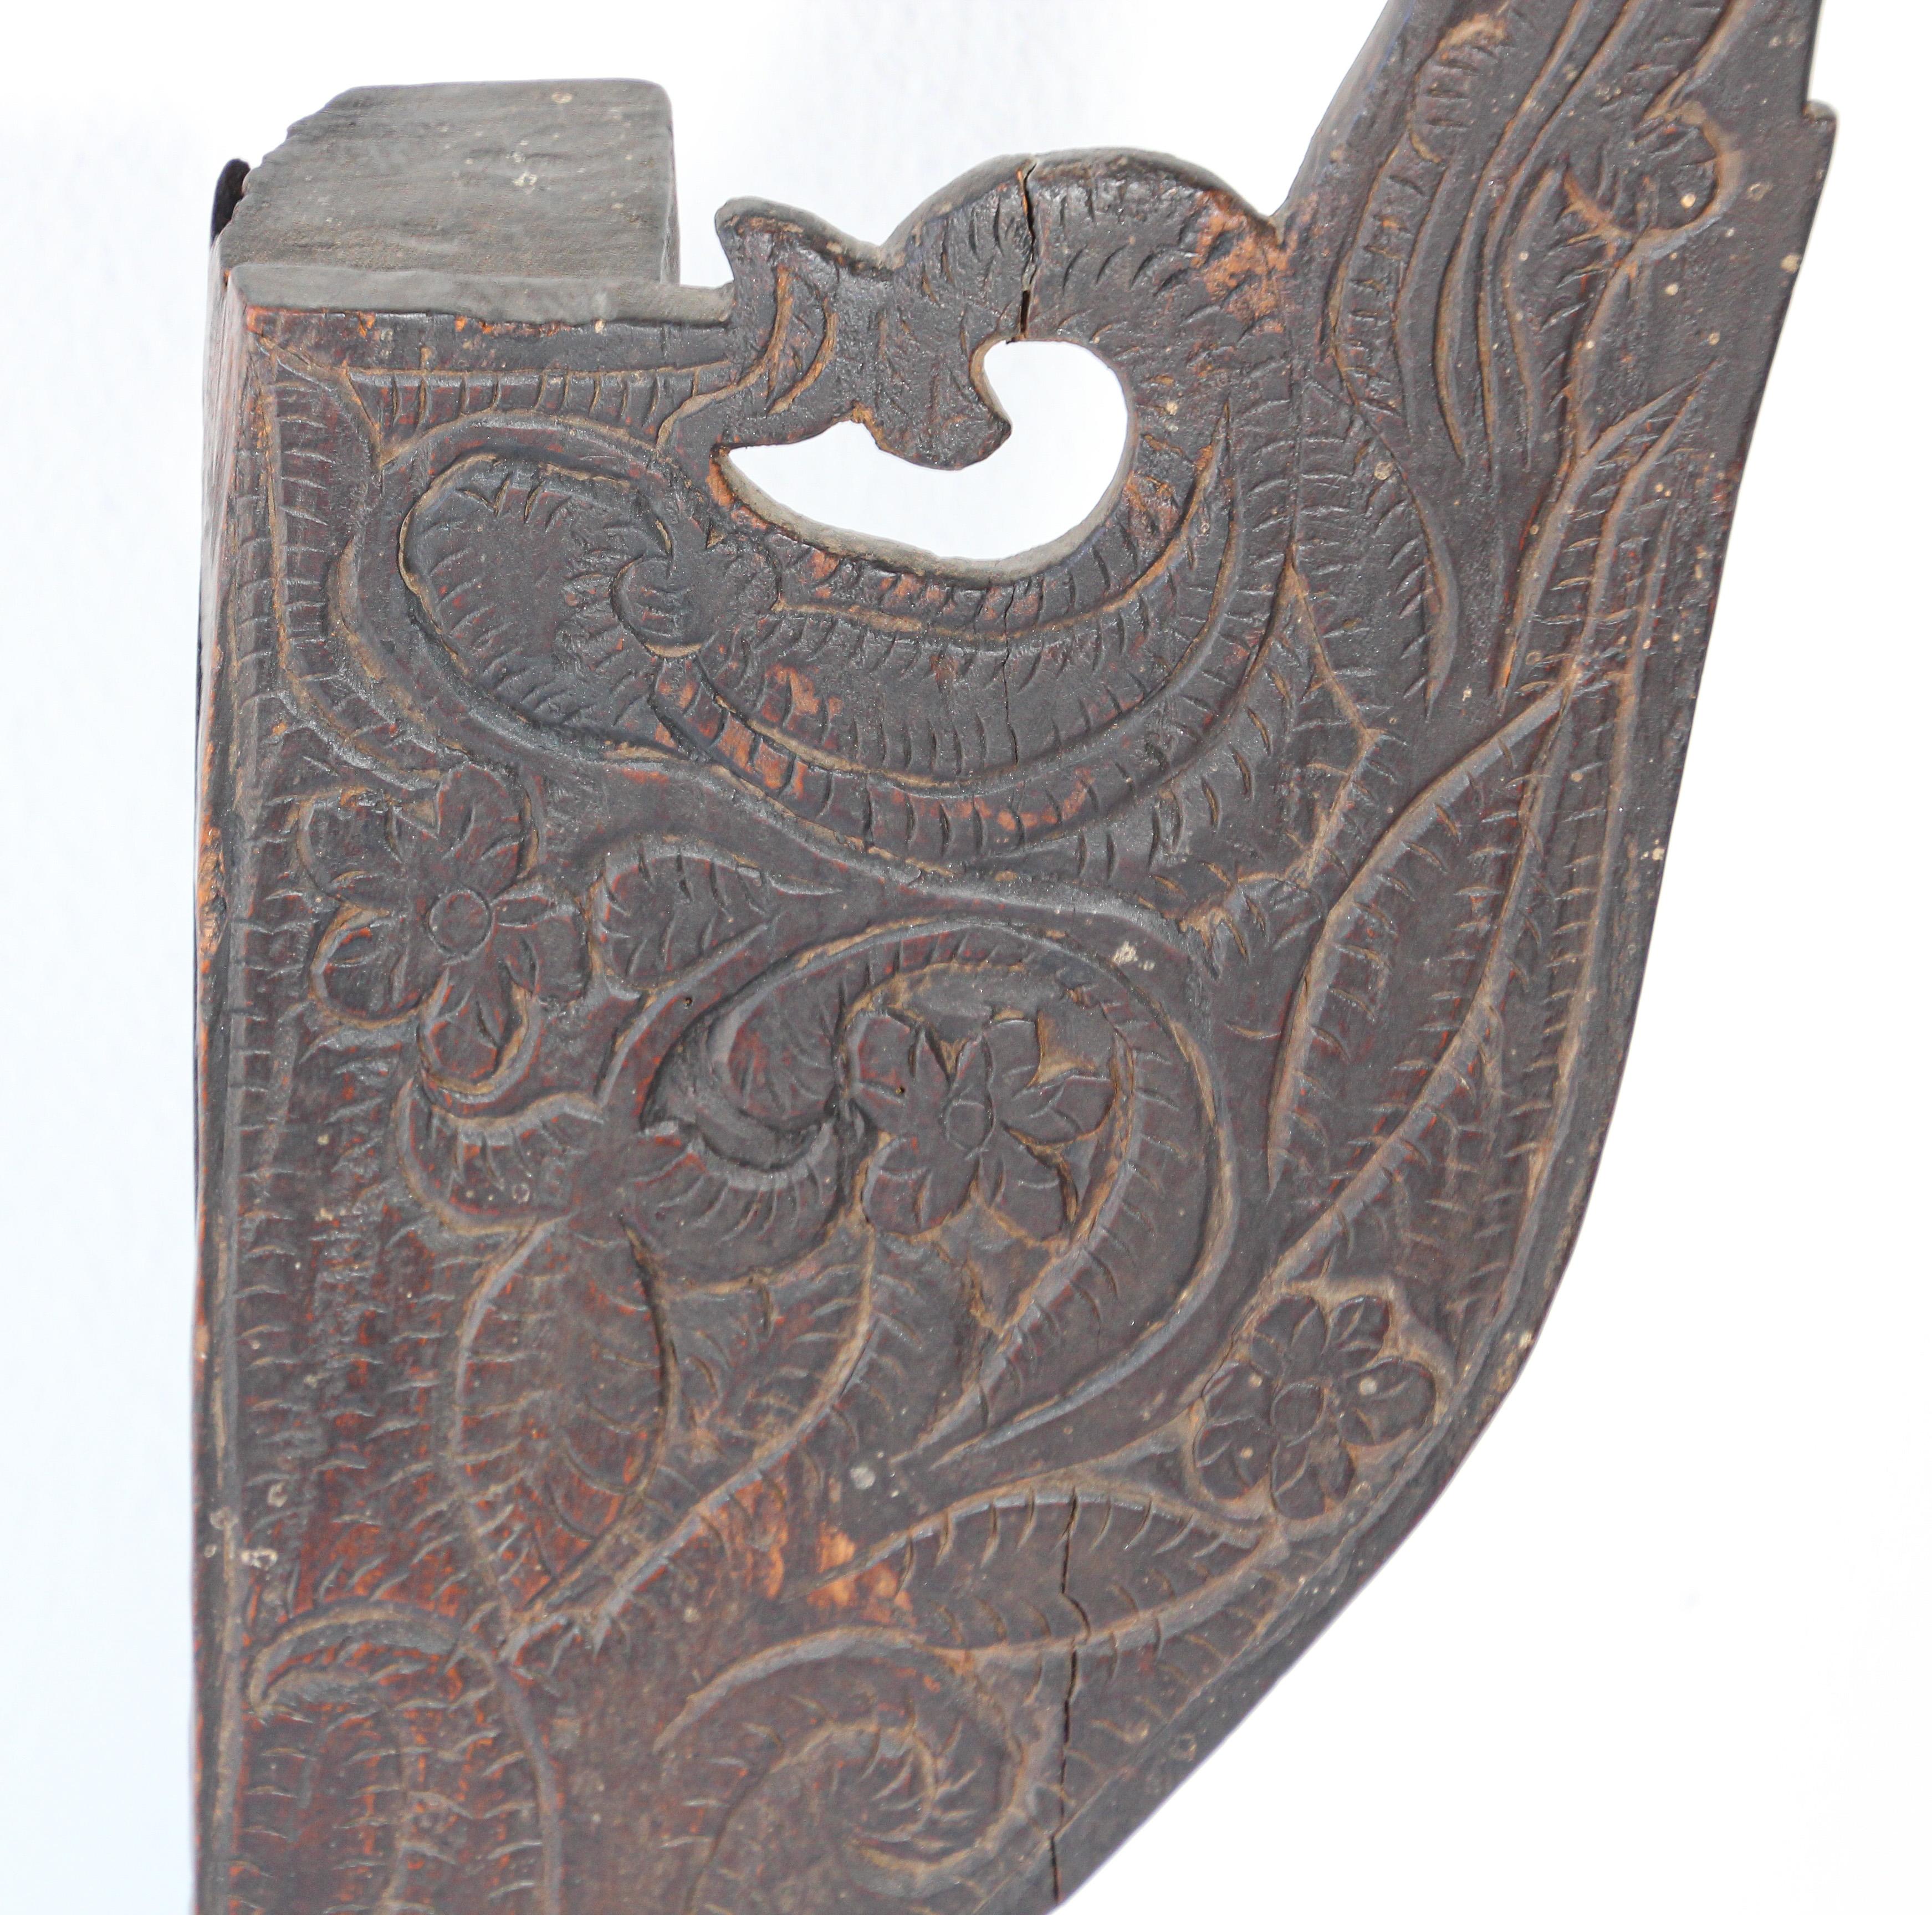 Architectural Carved Wood Temple Fragment from India In Fair Condition For Sale In North Hollywood, CA